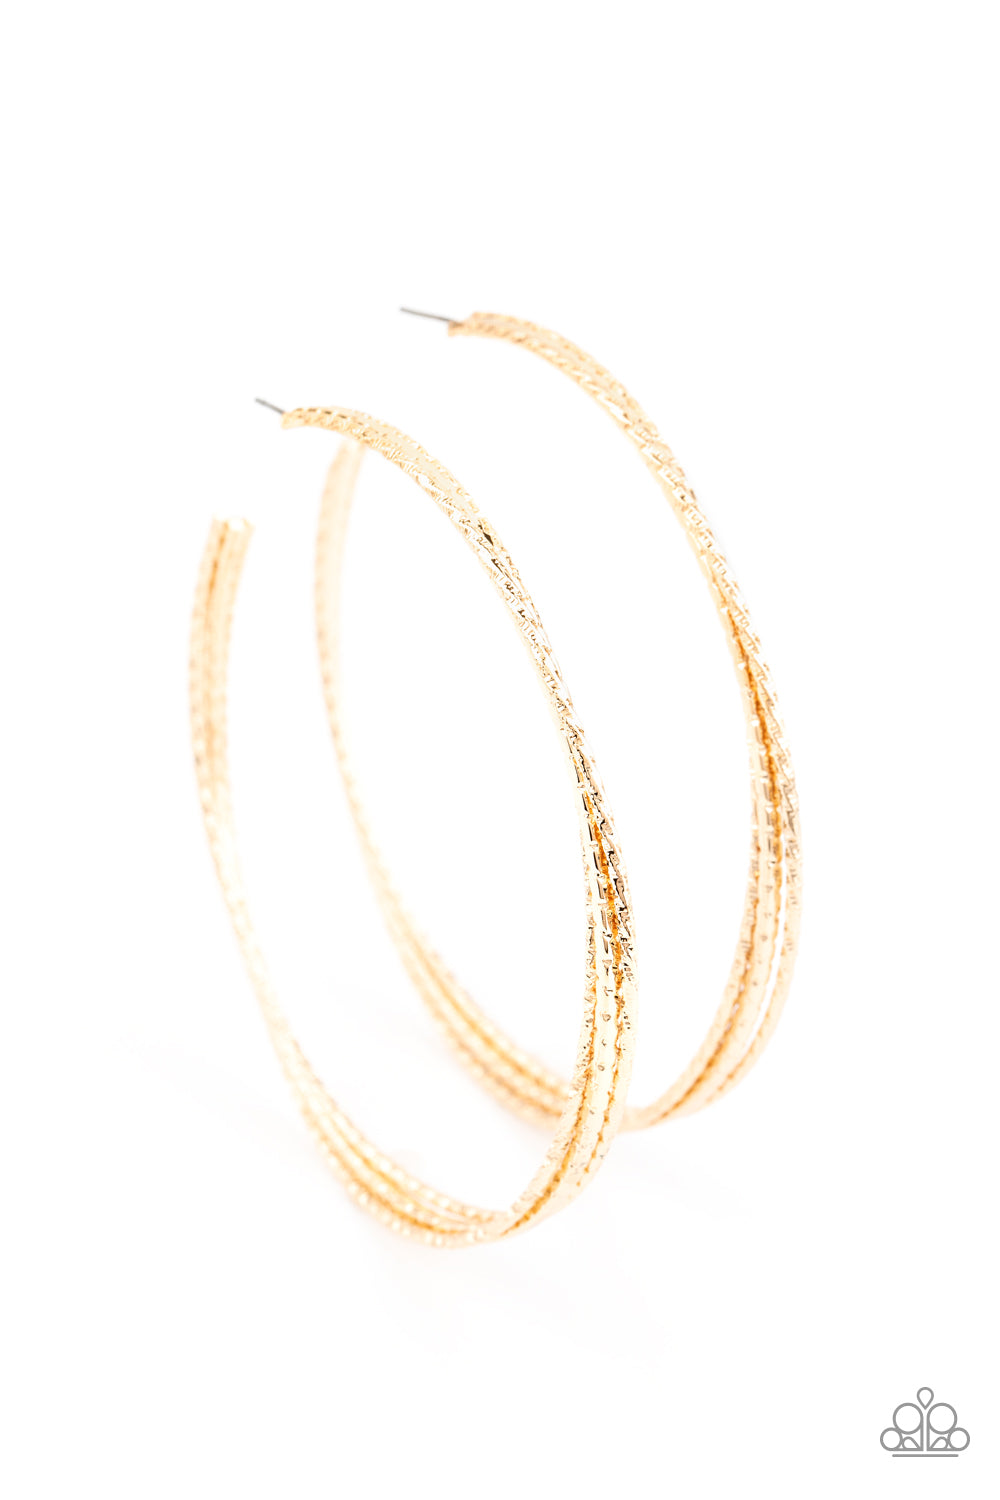 Paparazzi Watch and Learn - Gold Hoop Earrings - A Finishing Touch 